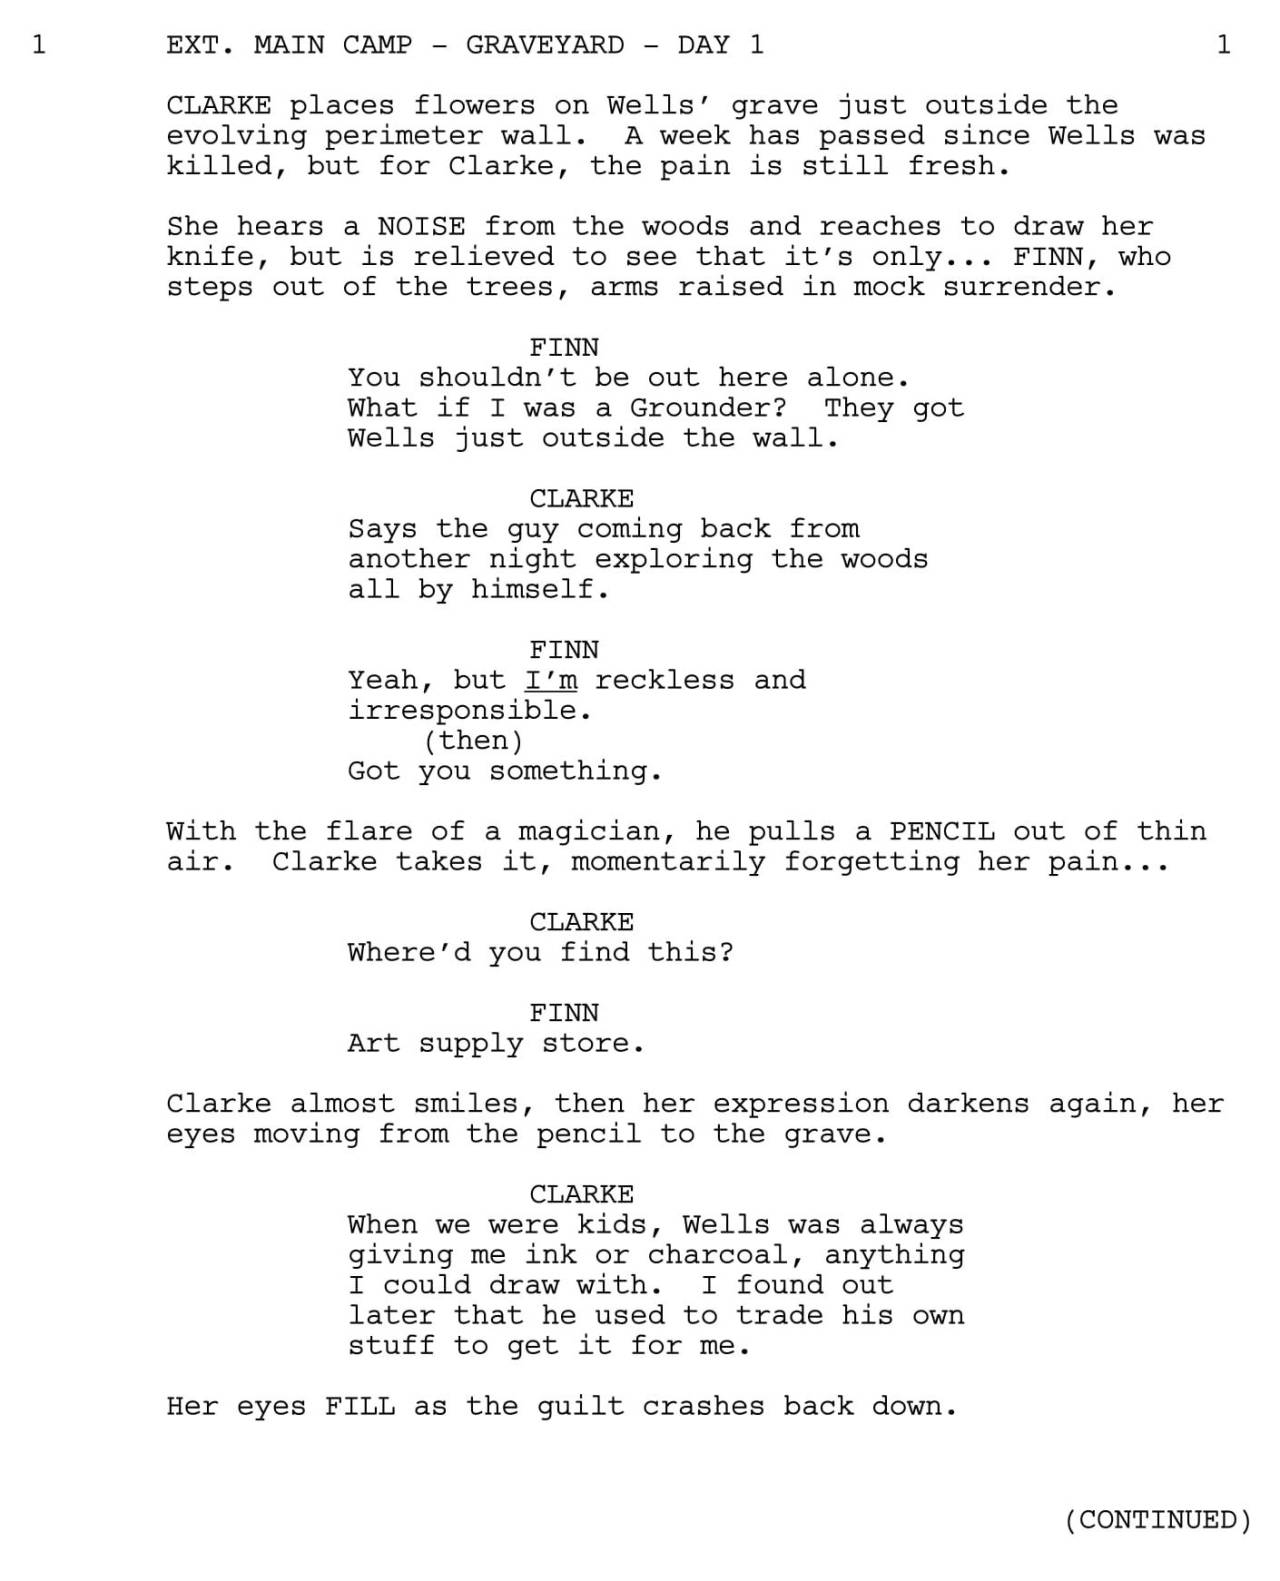 Time to end the night, Wonkru&hellip; Here’s the final scene from “Murphy’s